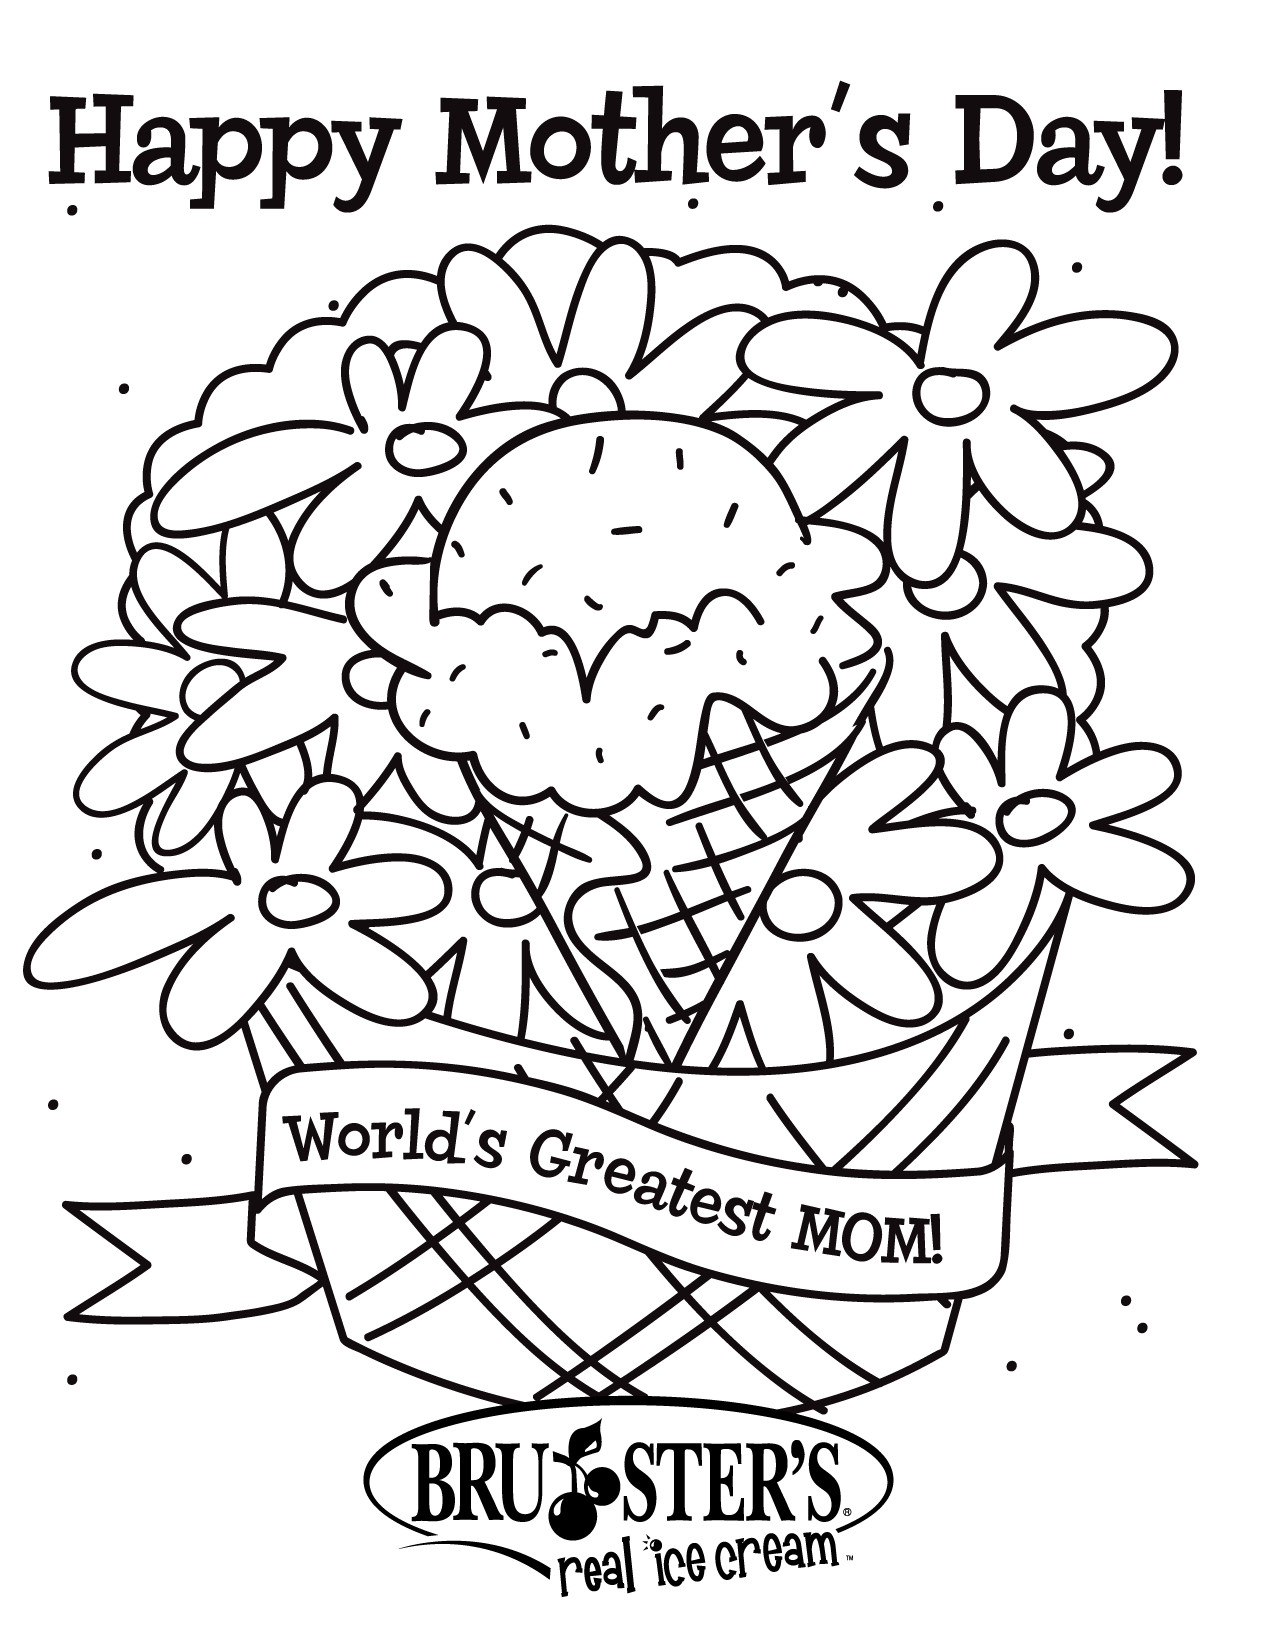 Free Printable Mothers Day Coloring Pages
 Free Printable Mothers Day Coloring Pages For Kids